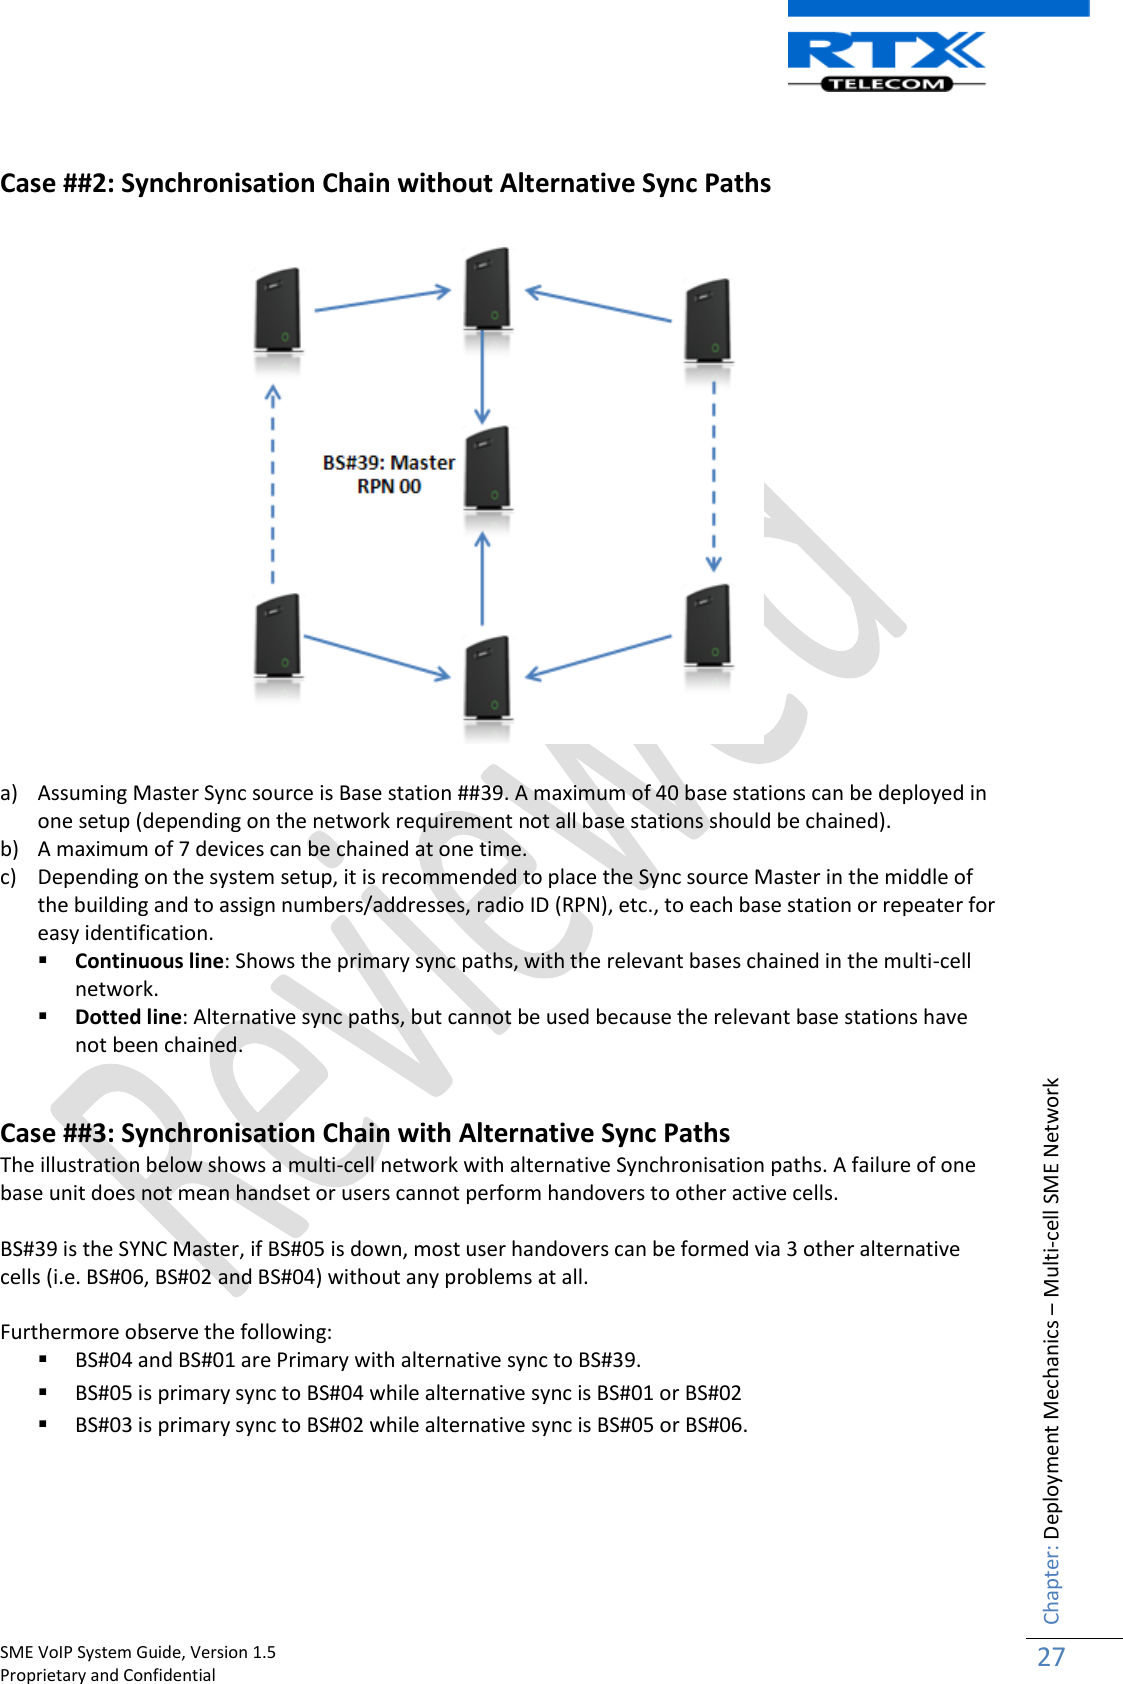    SME VoIP System Guide, Version 1.5                                                                                                                                                          Proprietary and Confidential    Chapter: Deployment Mechanics – Multi-cell SME Network 27   Case ##2: Synchronisation Chain without Alternative Sync Paths    a) Assuming Master Sync source is Base station ##39. A maximum of 40 base stations can be deployed in one setup (depending on the network requirement not all base stations should be chained). b) A maximum of 7 devices can be chained at one time. c) Depending on the system setup, it is recommended to place the Sync source Master in the middle of the building and to assign numbers/addresses, radio ID (RPN), etc., to each base station or repeater for easy identification.  Continuous line: Shows the primary sync paths, with the relevant bases chained in the multi-cell network.  Dotted line: Alternative sync paths, but cannot be used because the relevant base stations have not been chained.   Case ##3: Synchronisation Chain with Alternative Sync Paths The illustration below shows a multi-cell network with alternative Synchronisation paths. A failure of one base unit does not mean handset or users cannot perform handovers to other active cells.  BS#39 is the SYNC Master, if BS#05 is down, most user handovers can be formed via 3 other alternative cells (i.e. BS#06, BS#02 and BS#04) without any problems at all.  Furthermore observe the following:  BS#04 and BS#01 are Primary with alternative sync to BS#39.  BS#05 is primary sync to BS#04 while alternative sync is BS#01 or BS#02  BS#03 is primary sync to BS#02 while alternative sync is BS#05 or BS#06.   